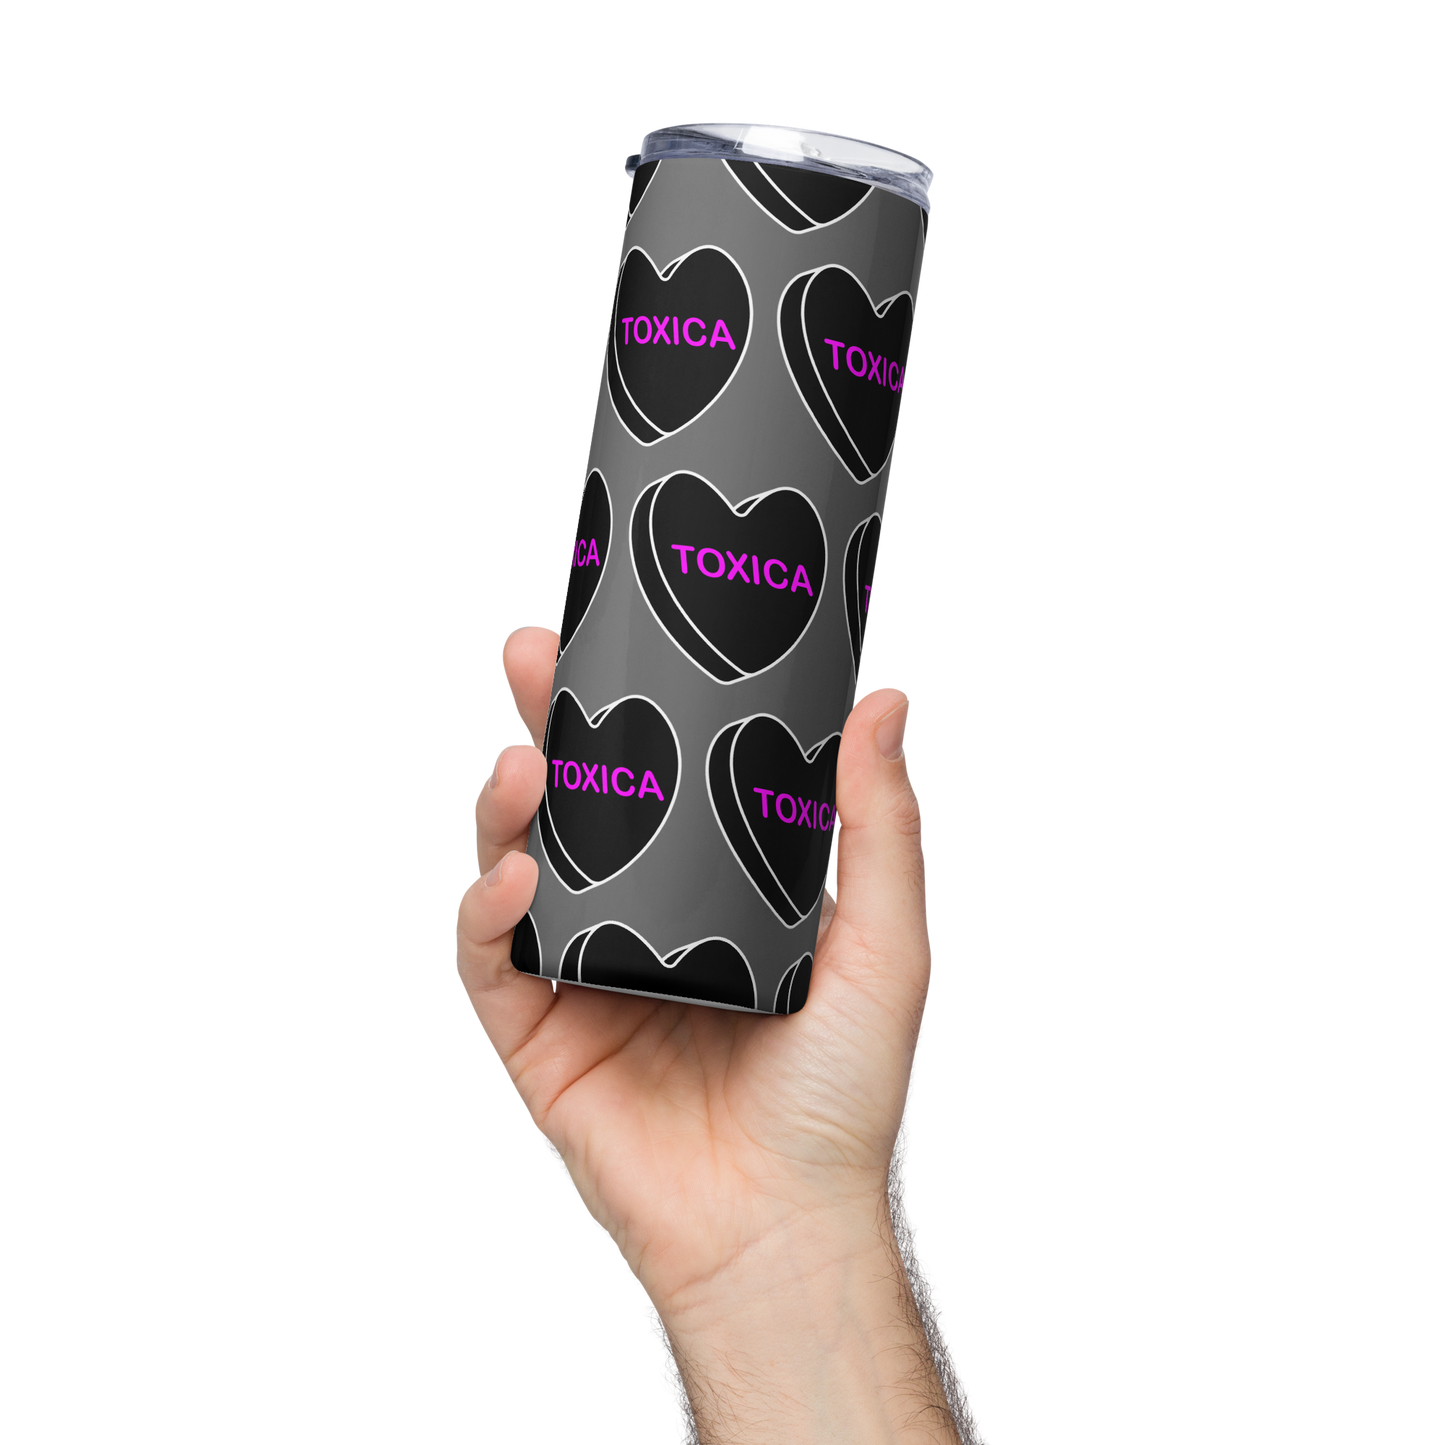 Toxica Candy Conversation Heart - Stainless steel tumbler